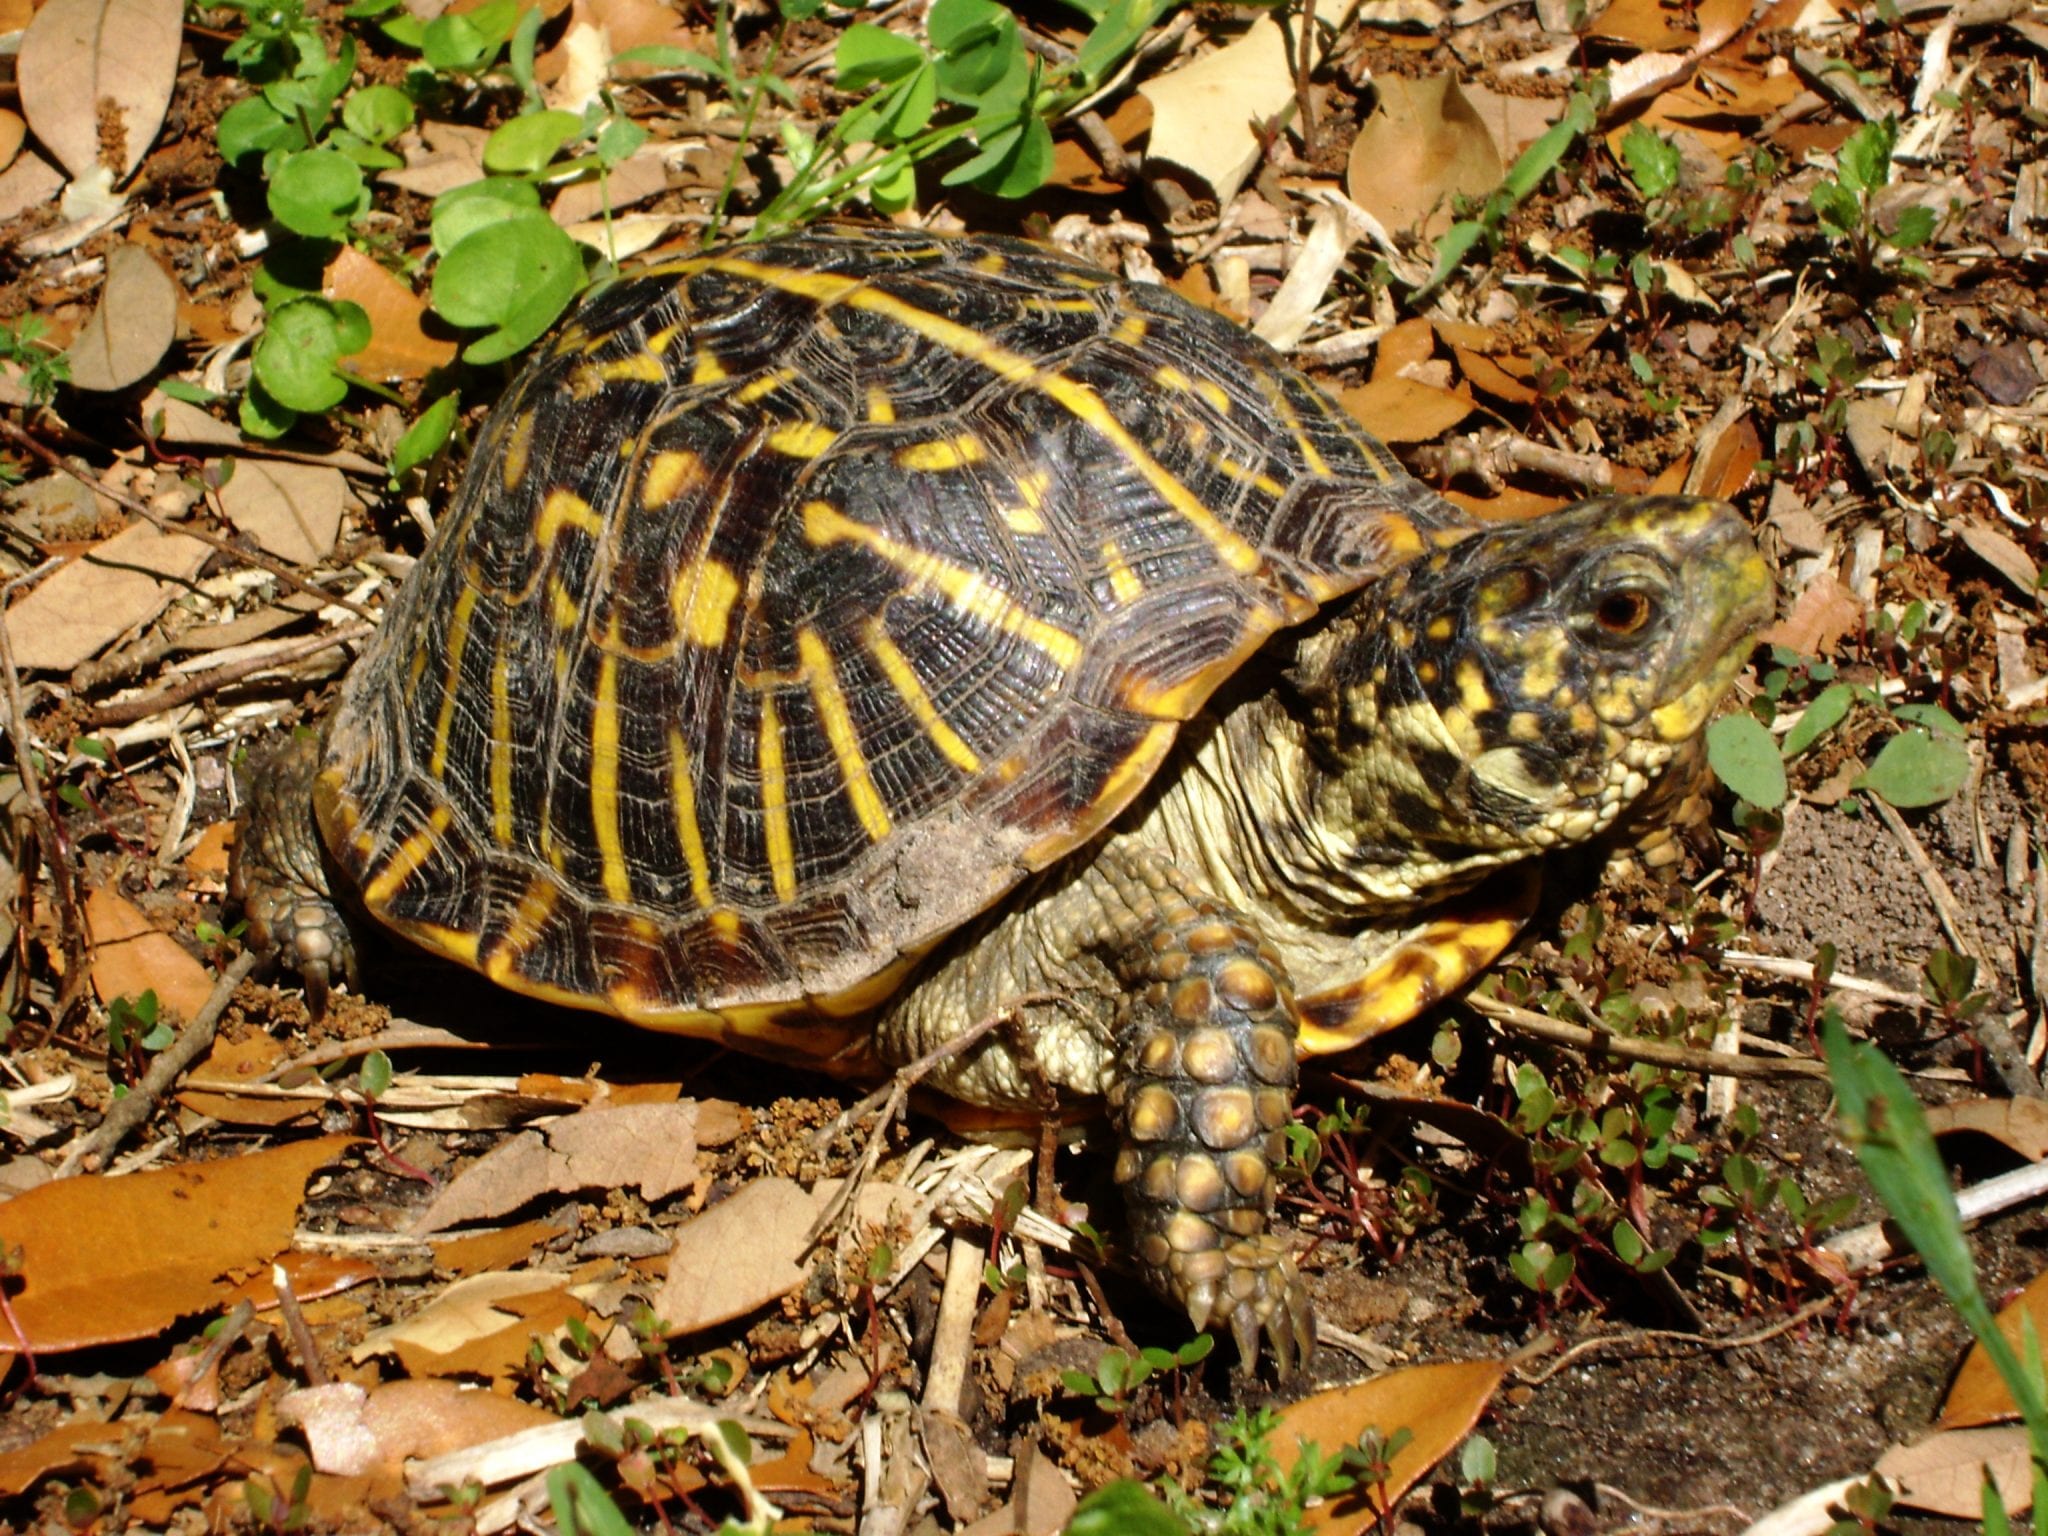 How to care for a box turtle Idea